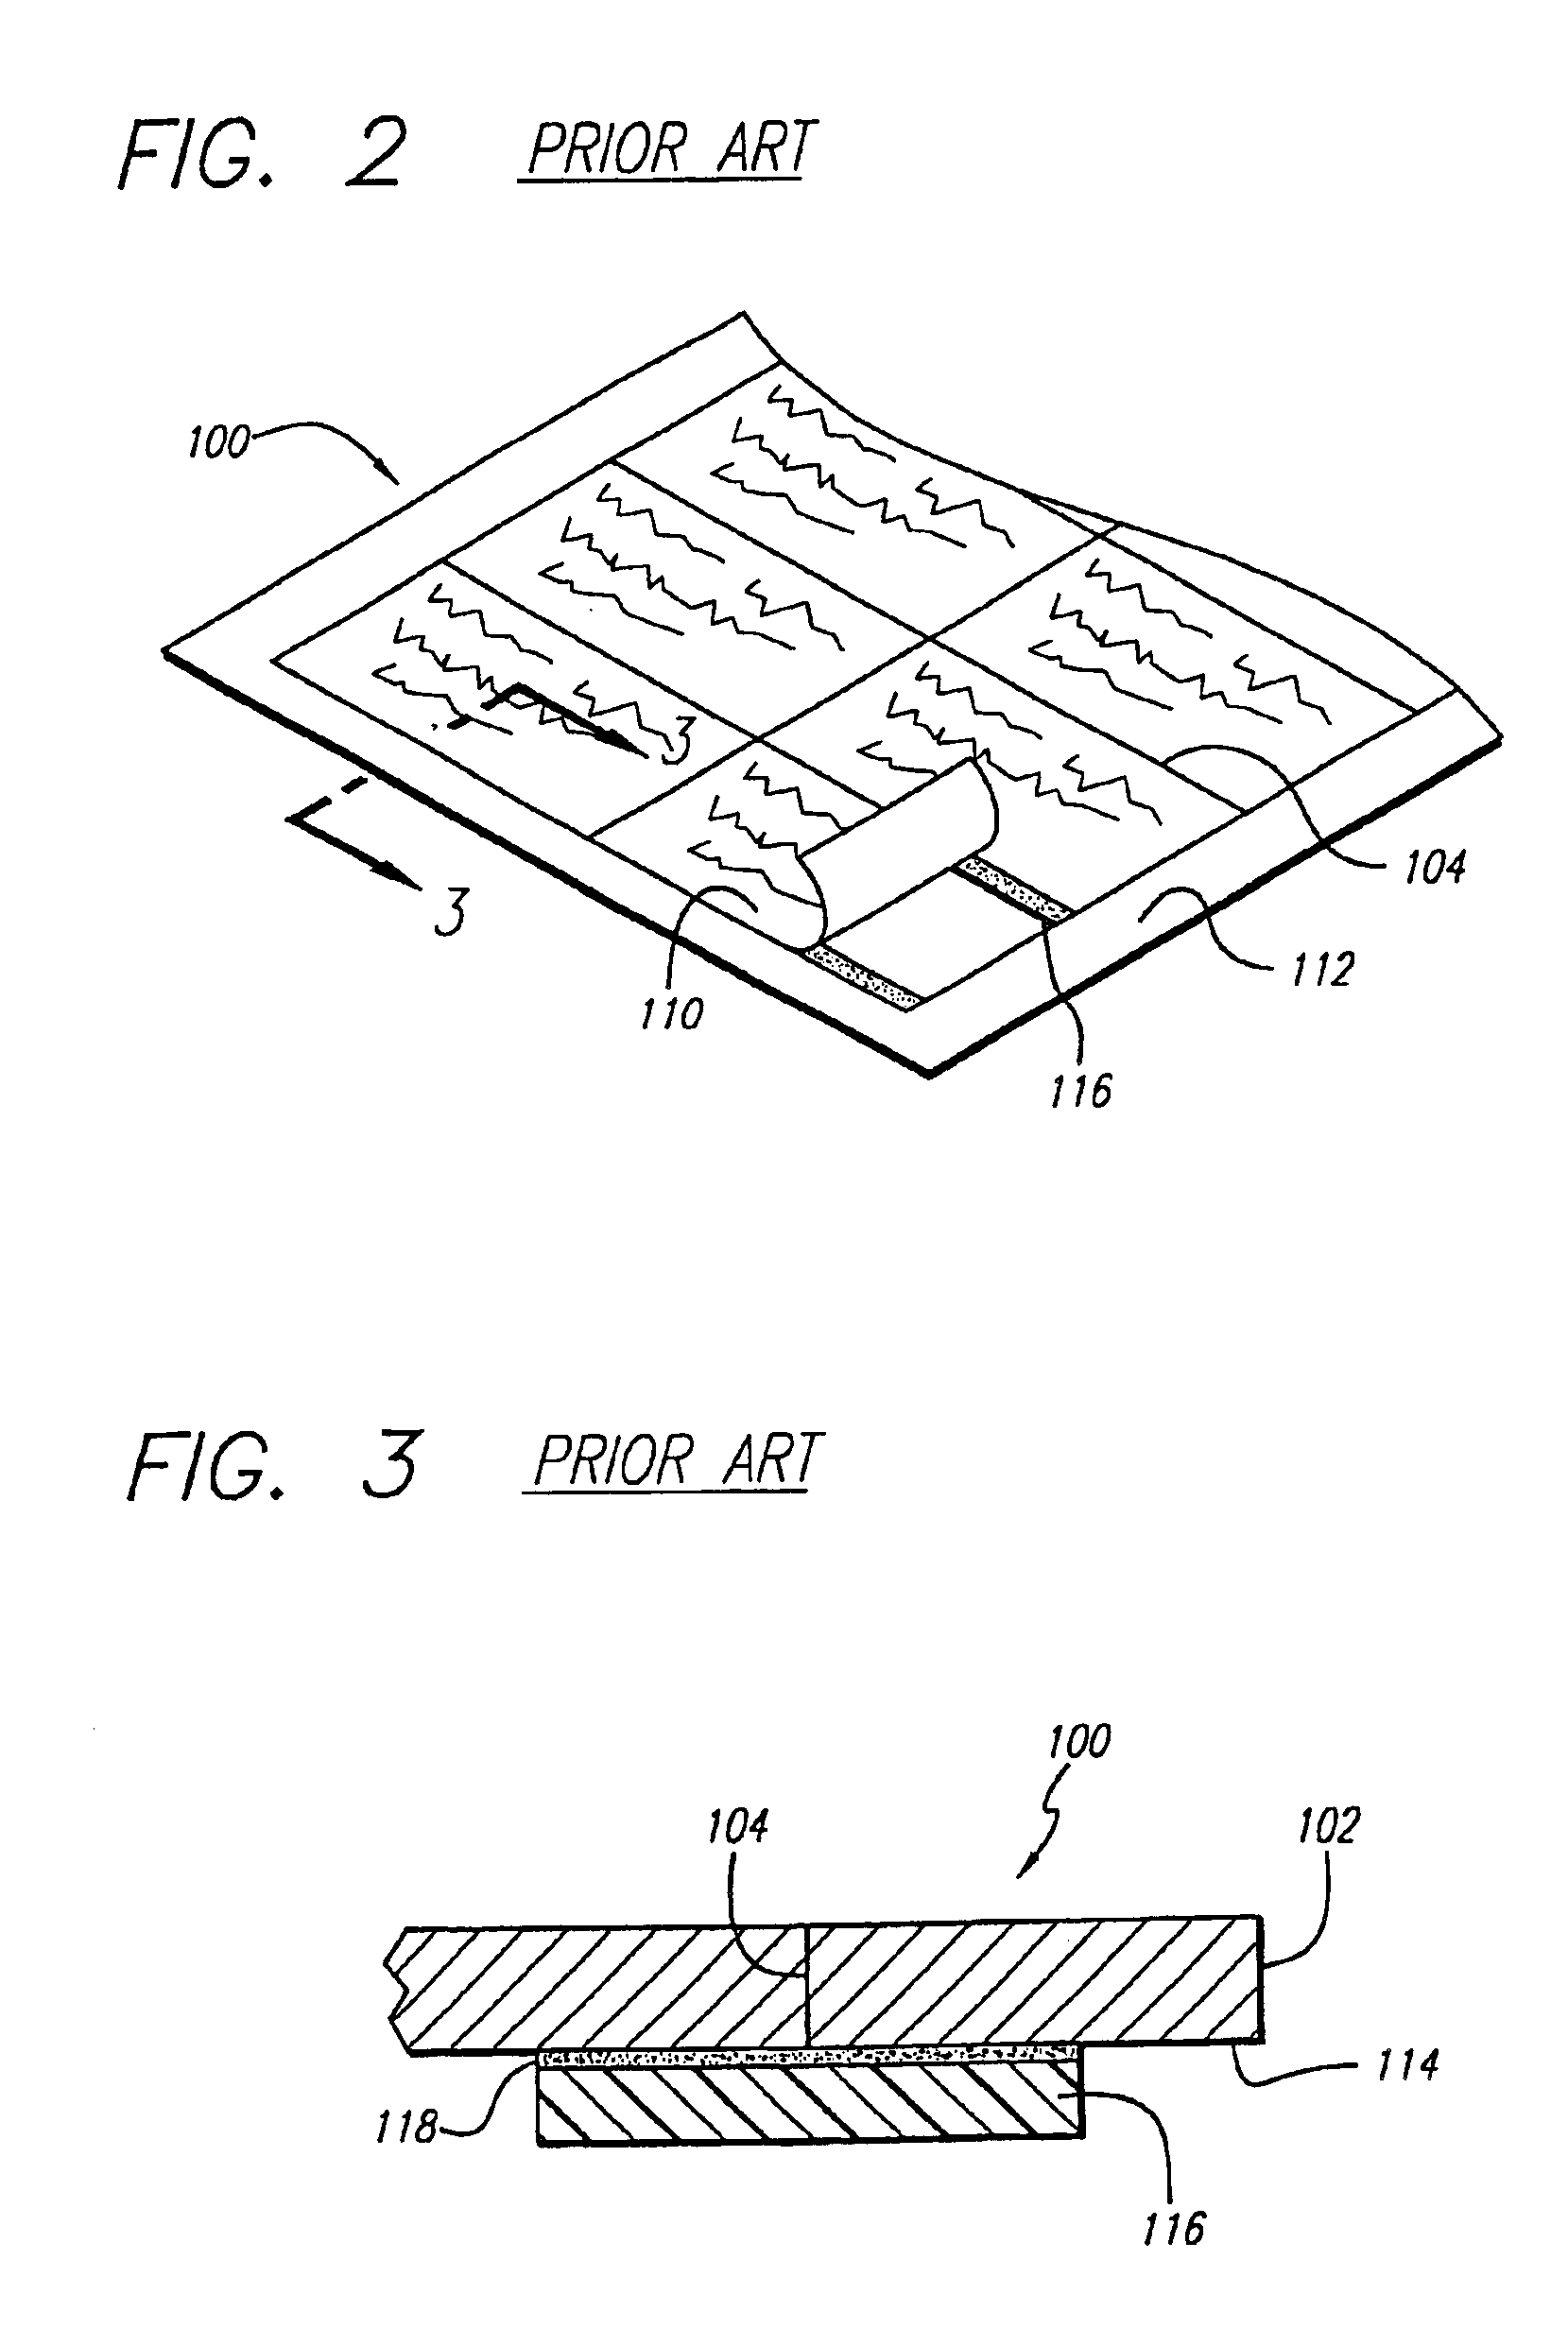 Method of forming sheets of printable media